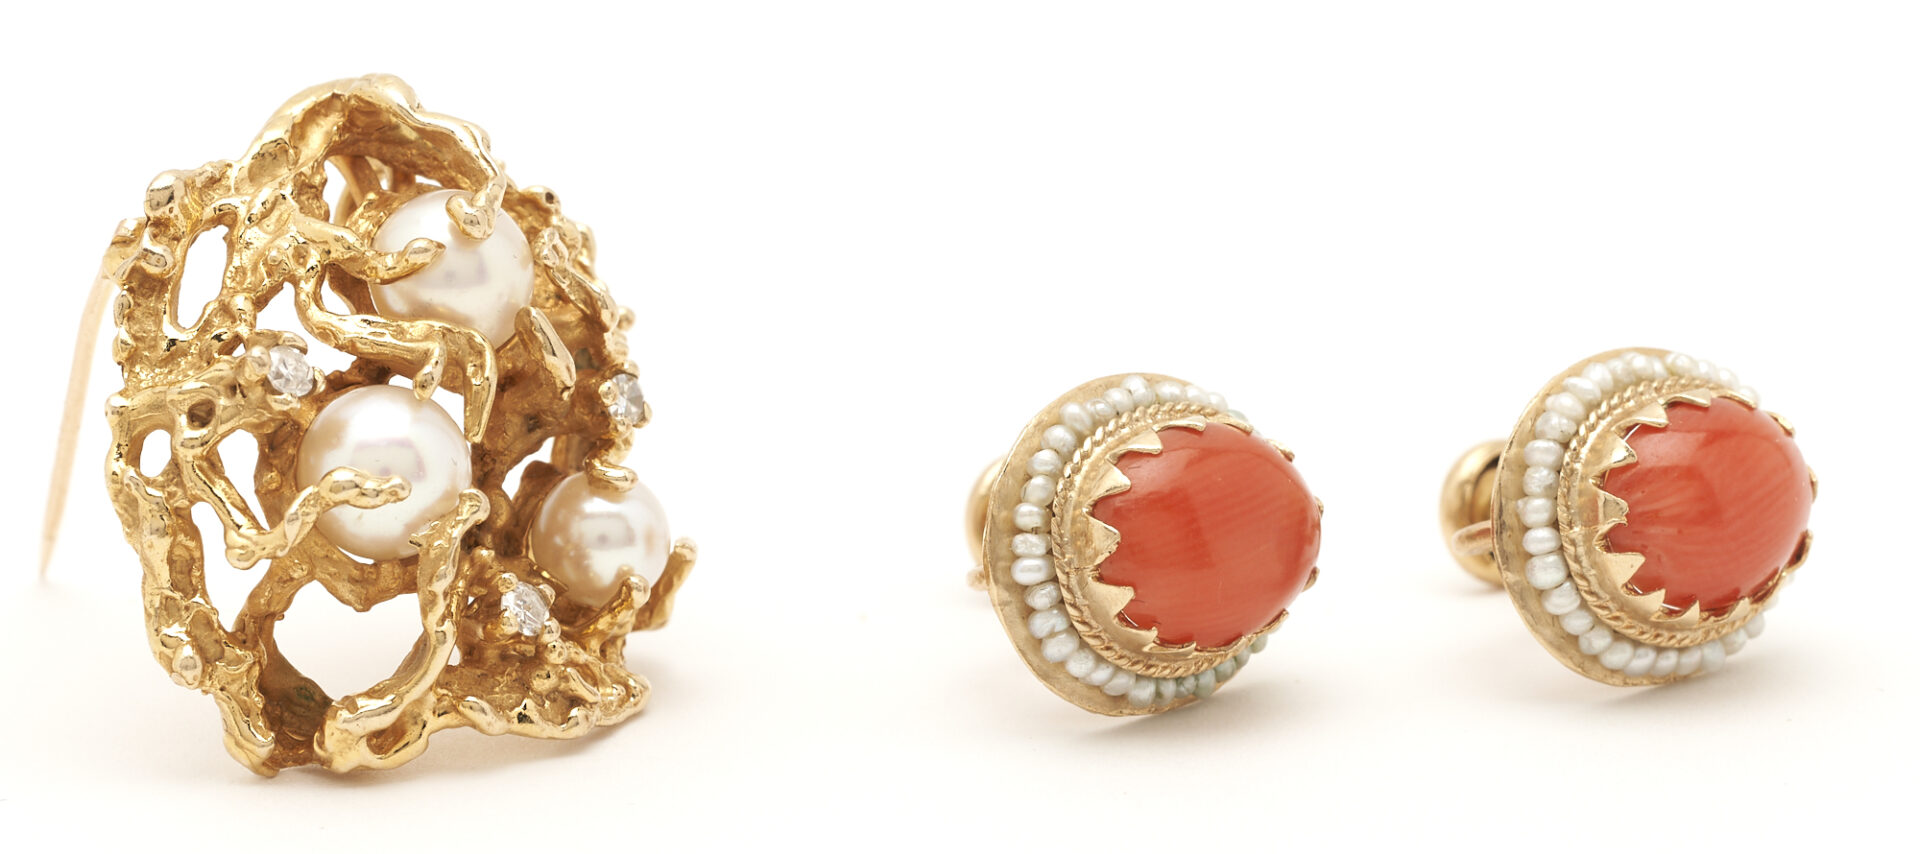 Lot 433: Pearl and Diamond Nugget Brooch plus Red Coral Earrings (2 items)